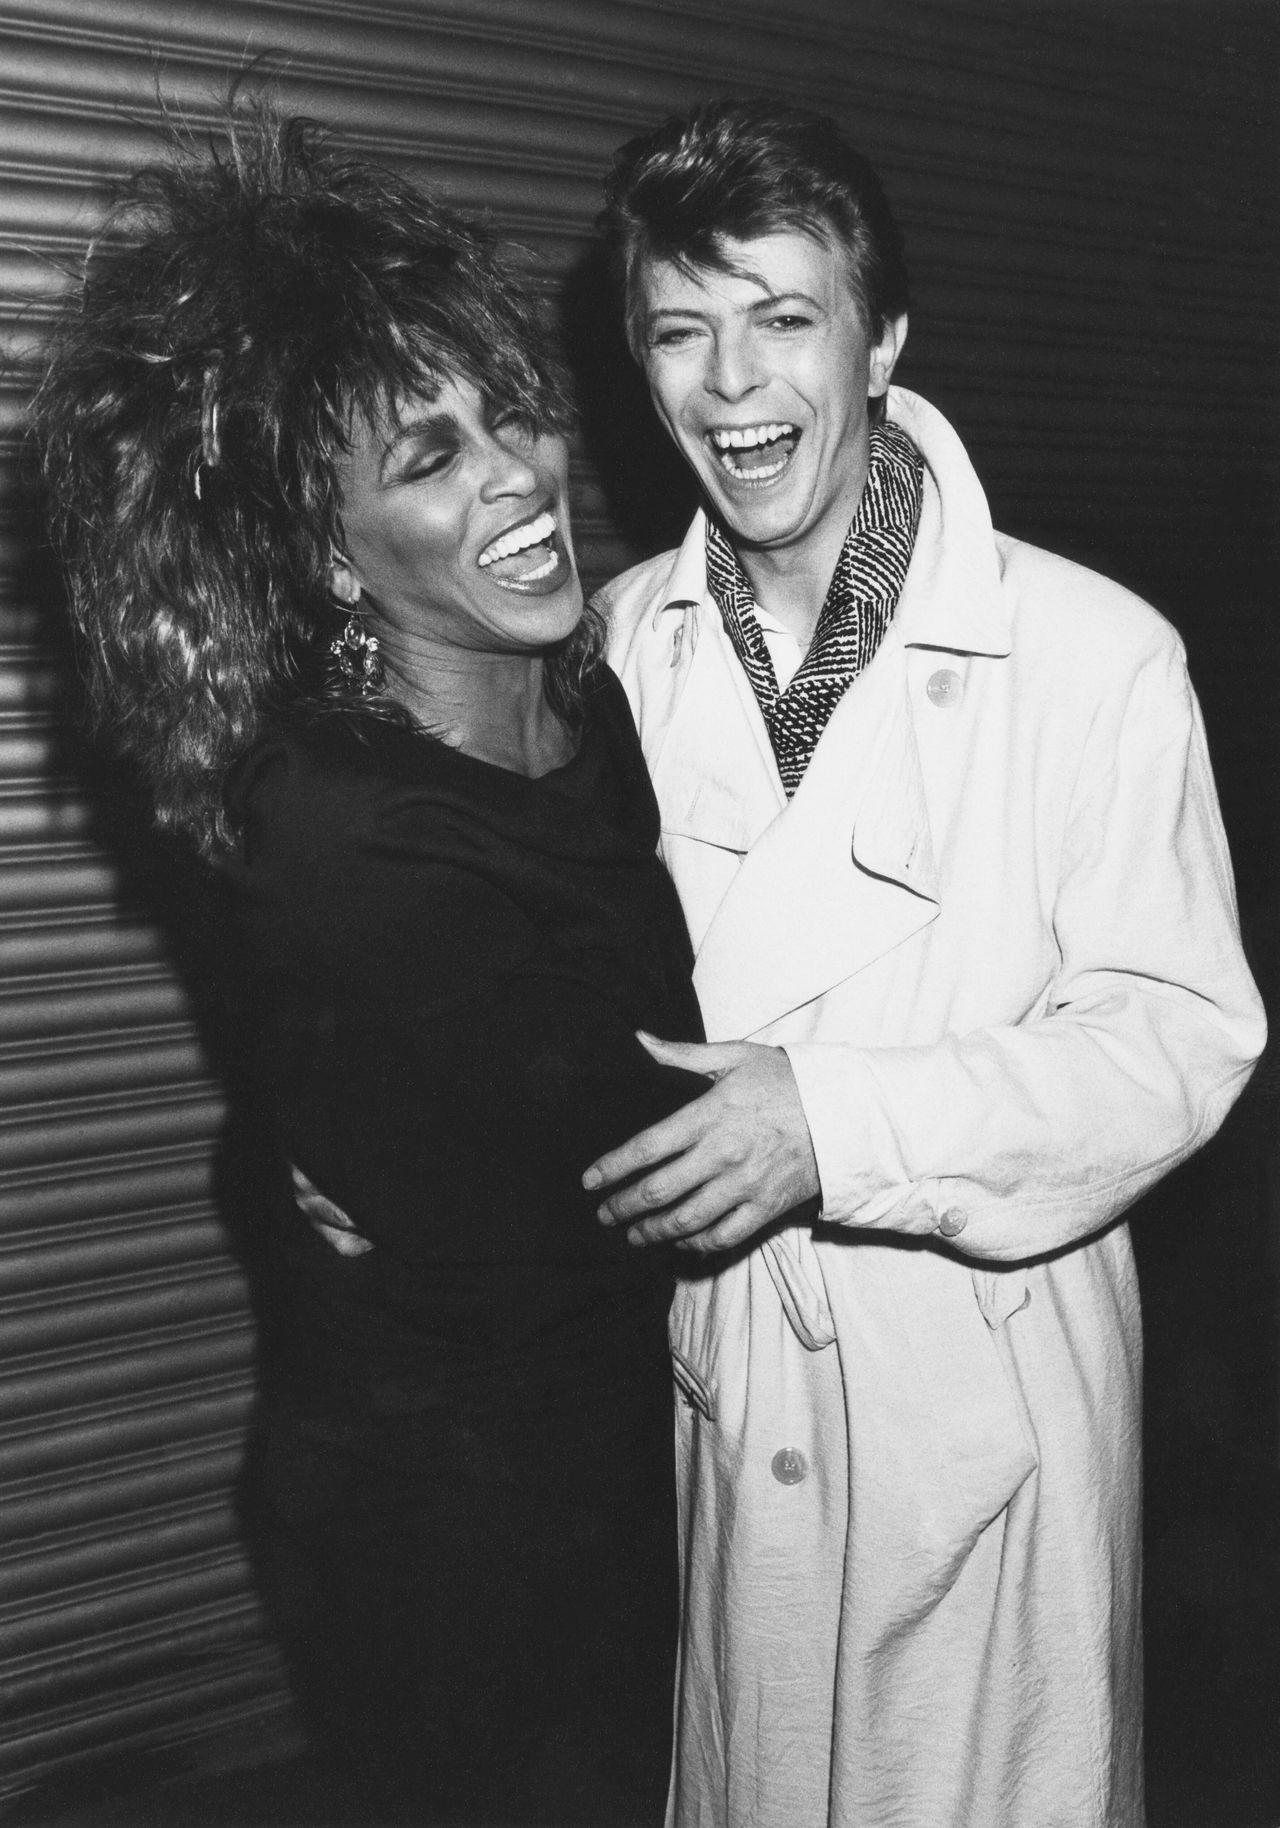 Turner with English singer-songwriter David Bowie in 1985.